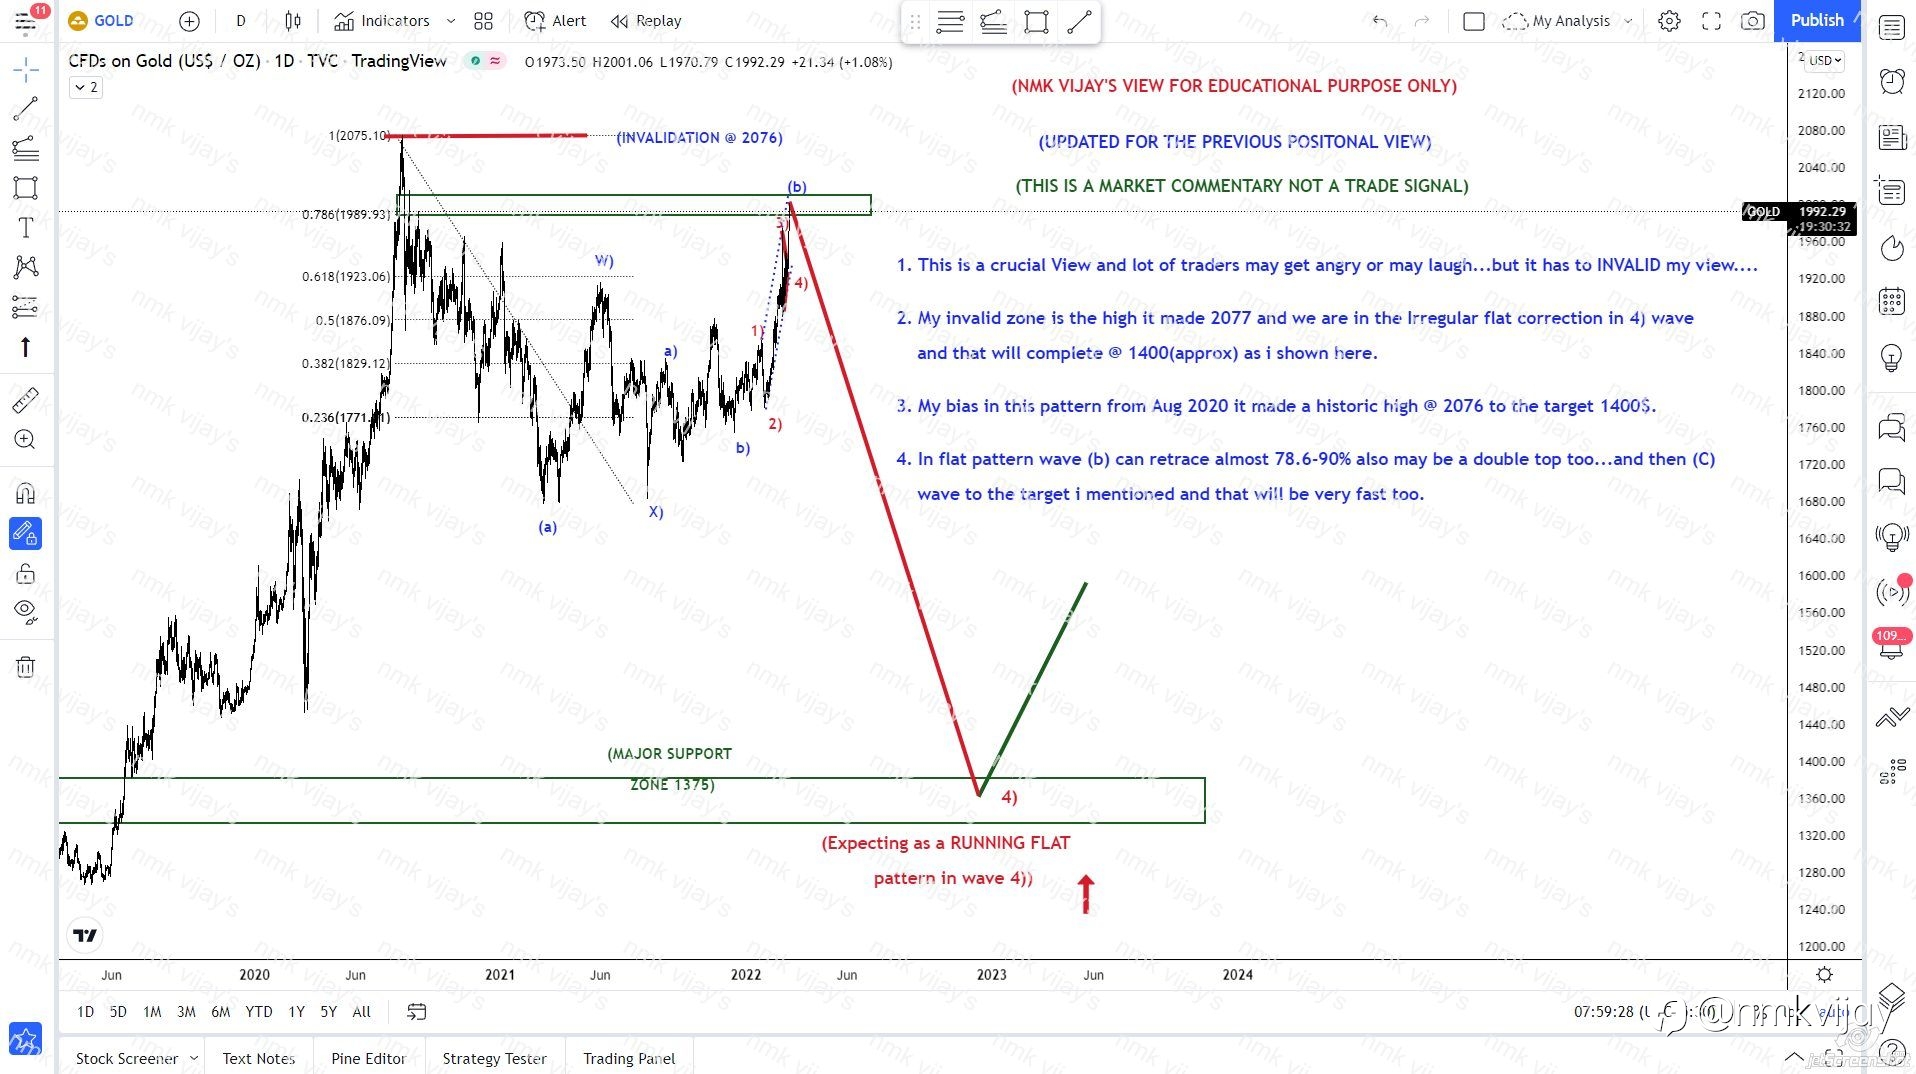 GOLD- Invalidation given and we are in wave (b) as a FLAT.